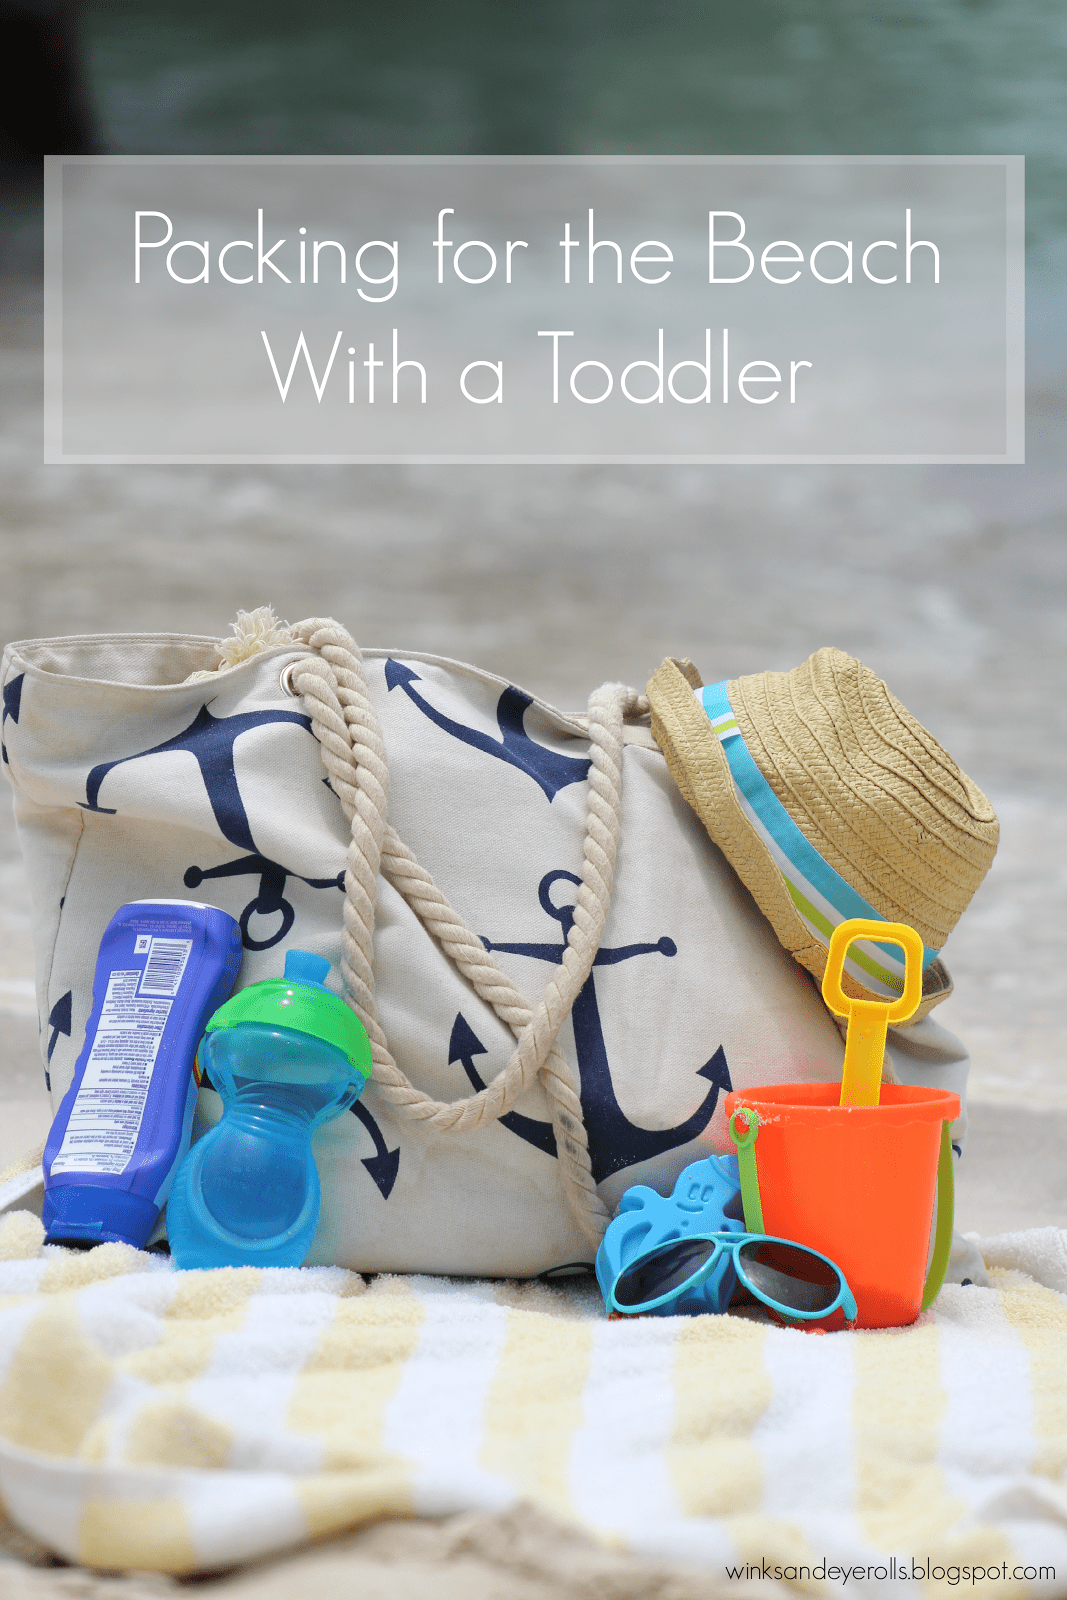 Packing for the beach with a toddler